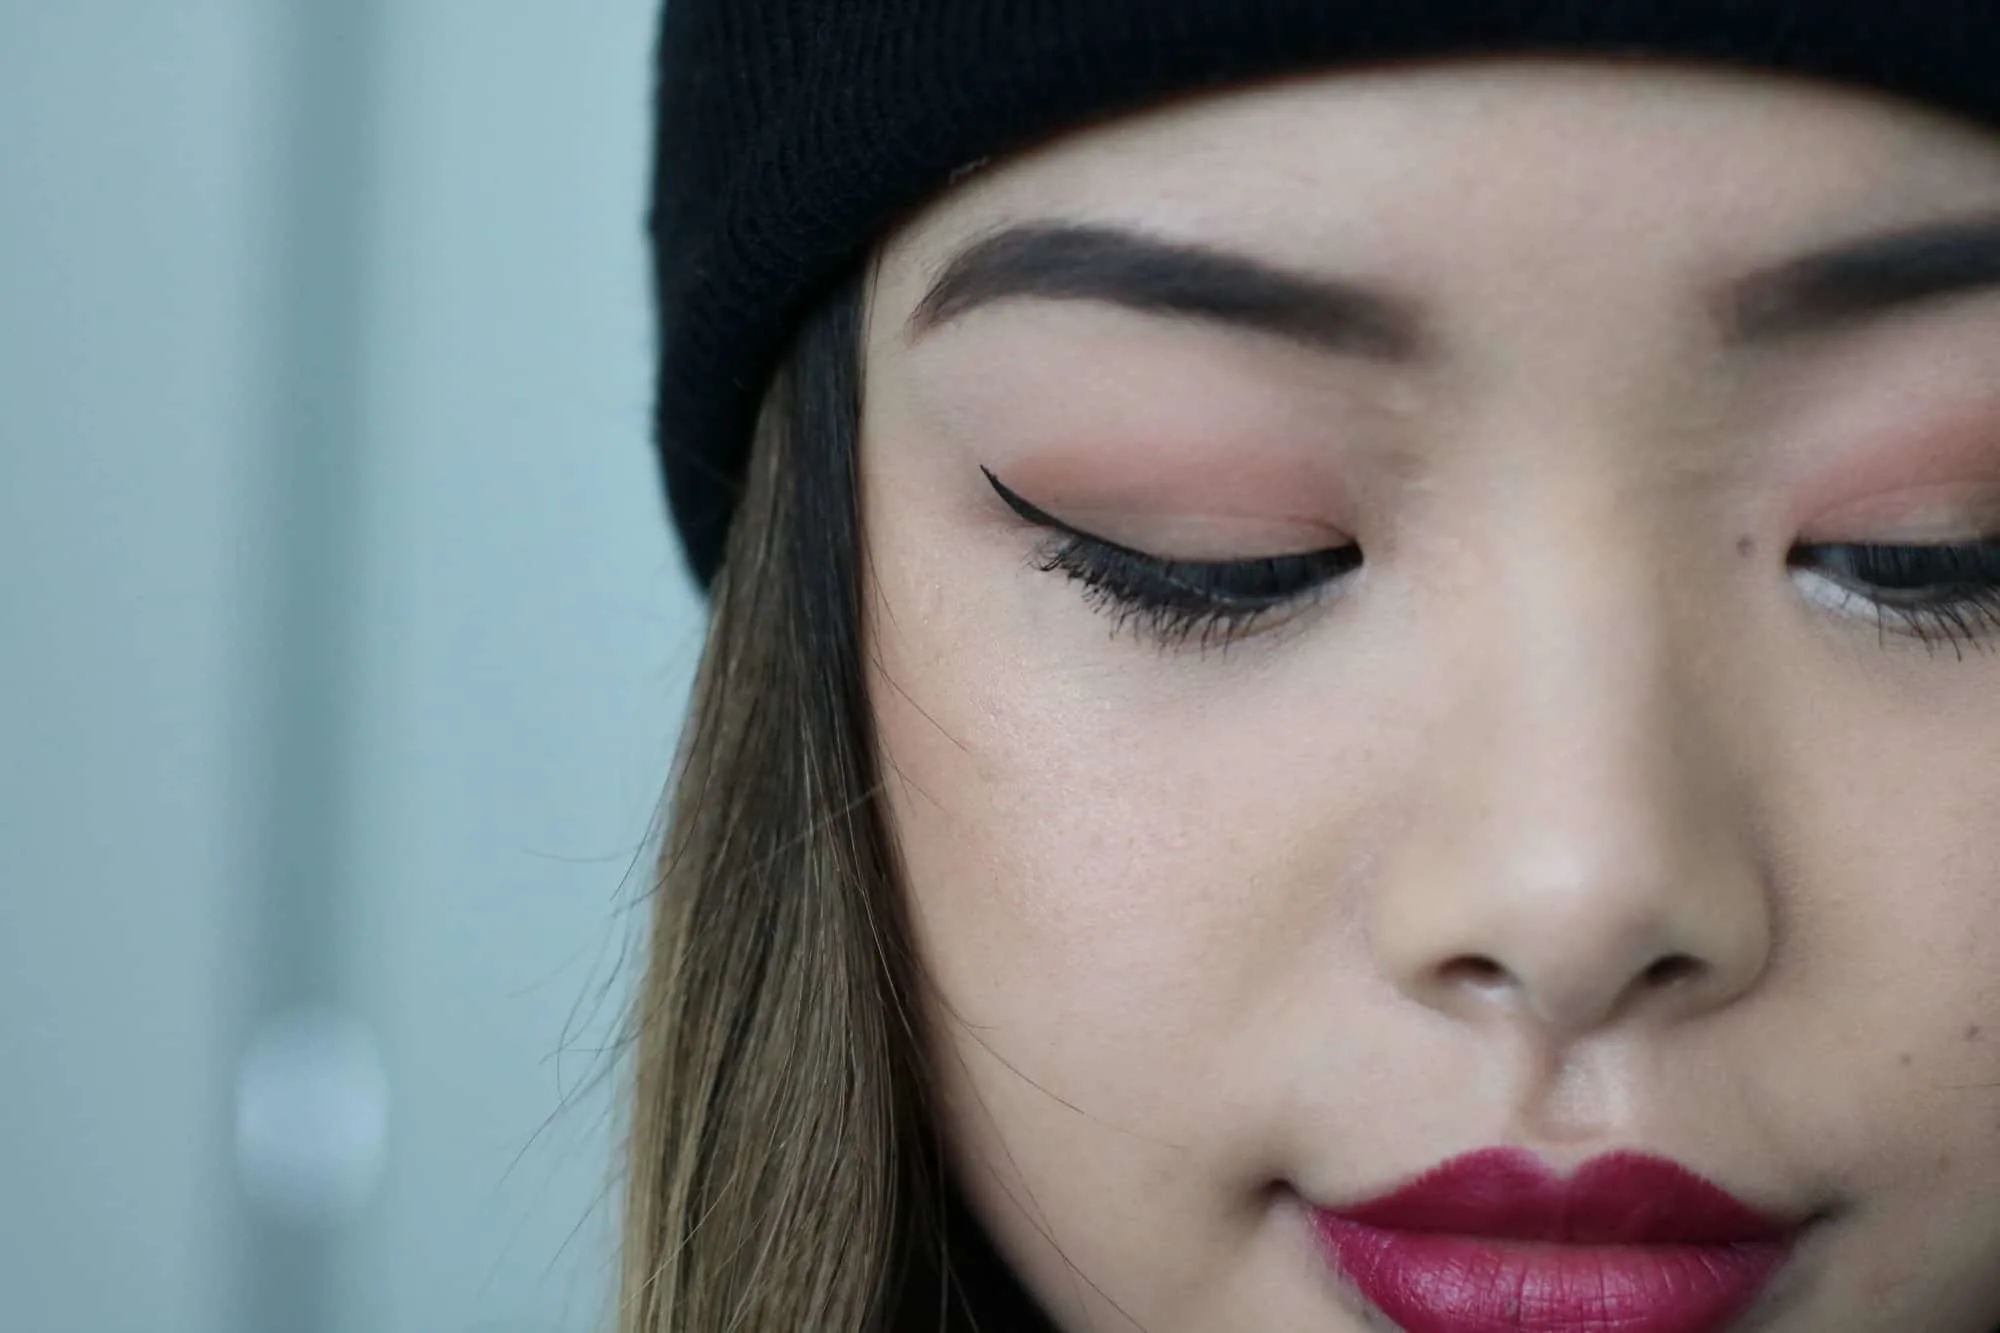 My everyday fall/winter makeup routine